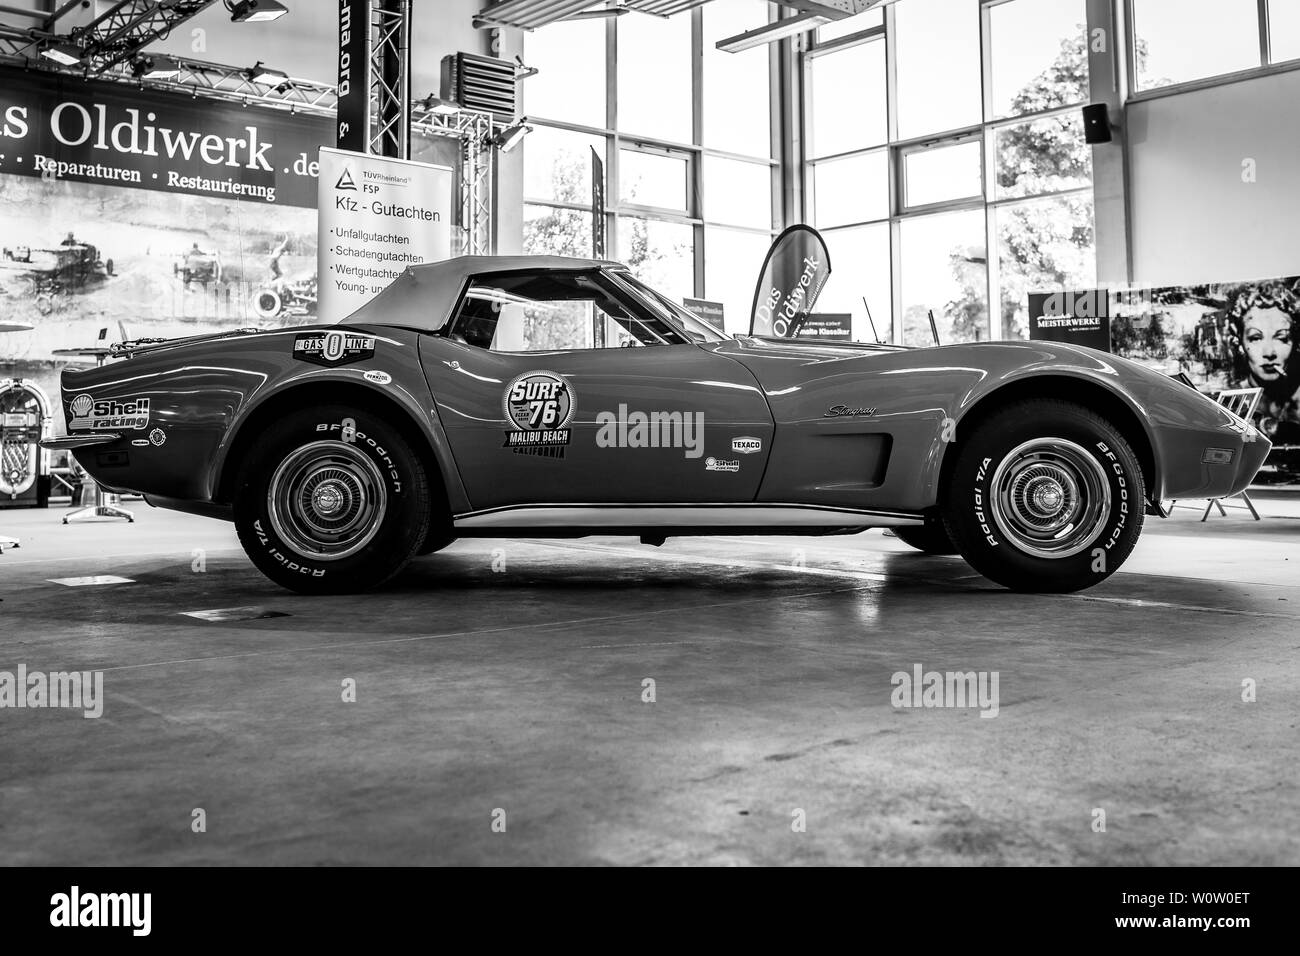 Old corvette Black and White Stock Photos & Images - Alamy